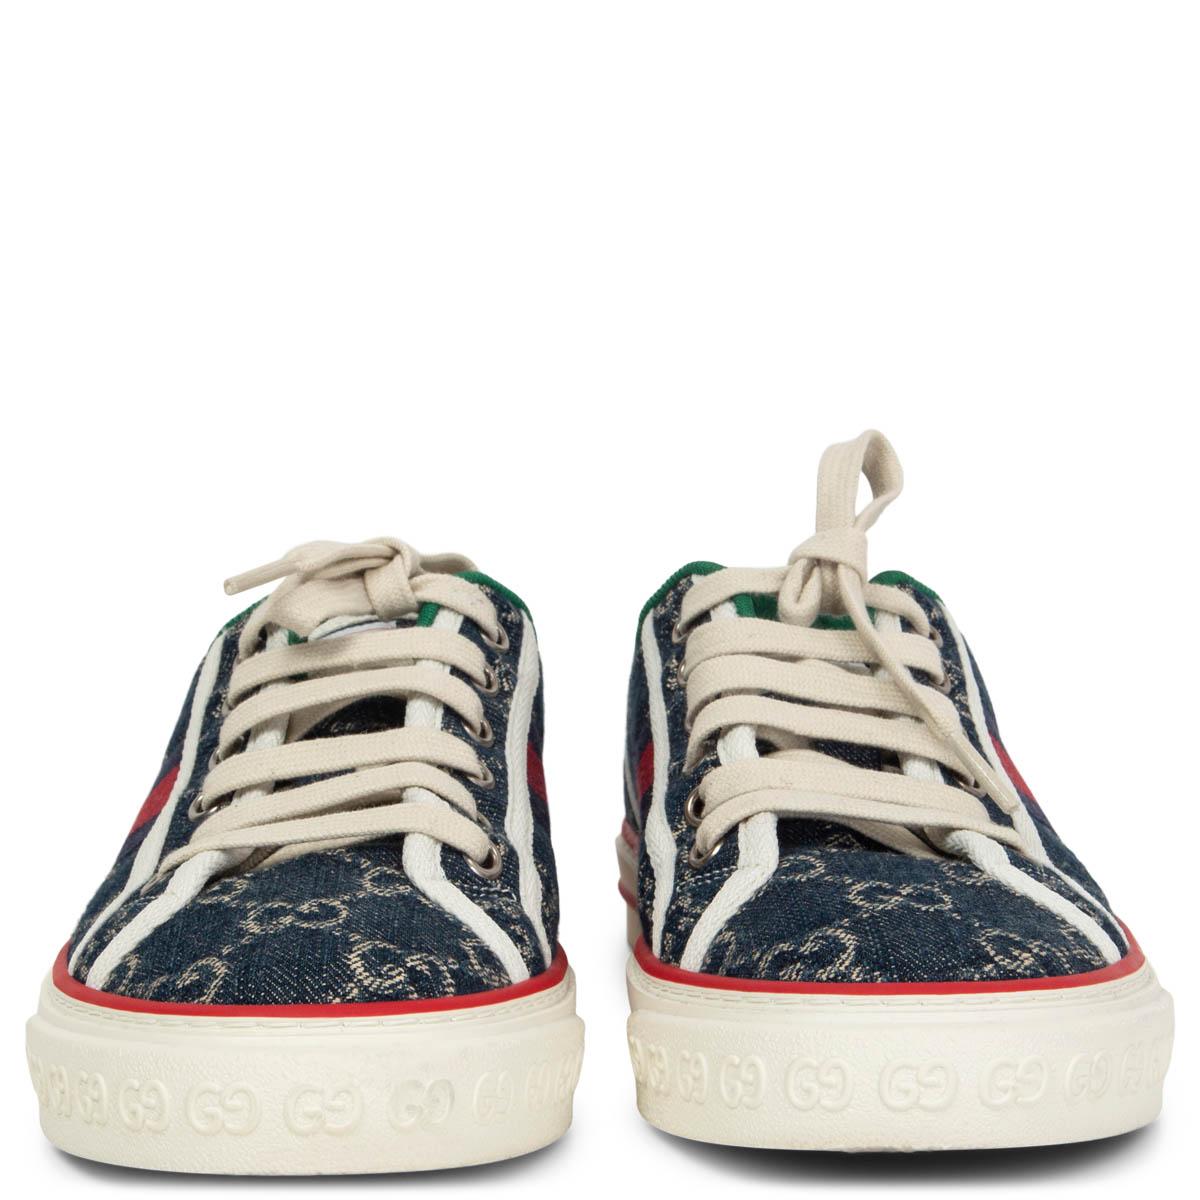 100% authentic Gucci Tennis 1977 sneaker crafted from navy blue organic jacquard denim. With an allover GG motif and signature Web stripe on the side. Brand new. 

Measurements
Imprinted Size	37.5
Shoe Size	37.5
Inside Sole	24.5cm